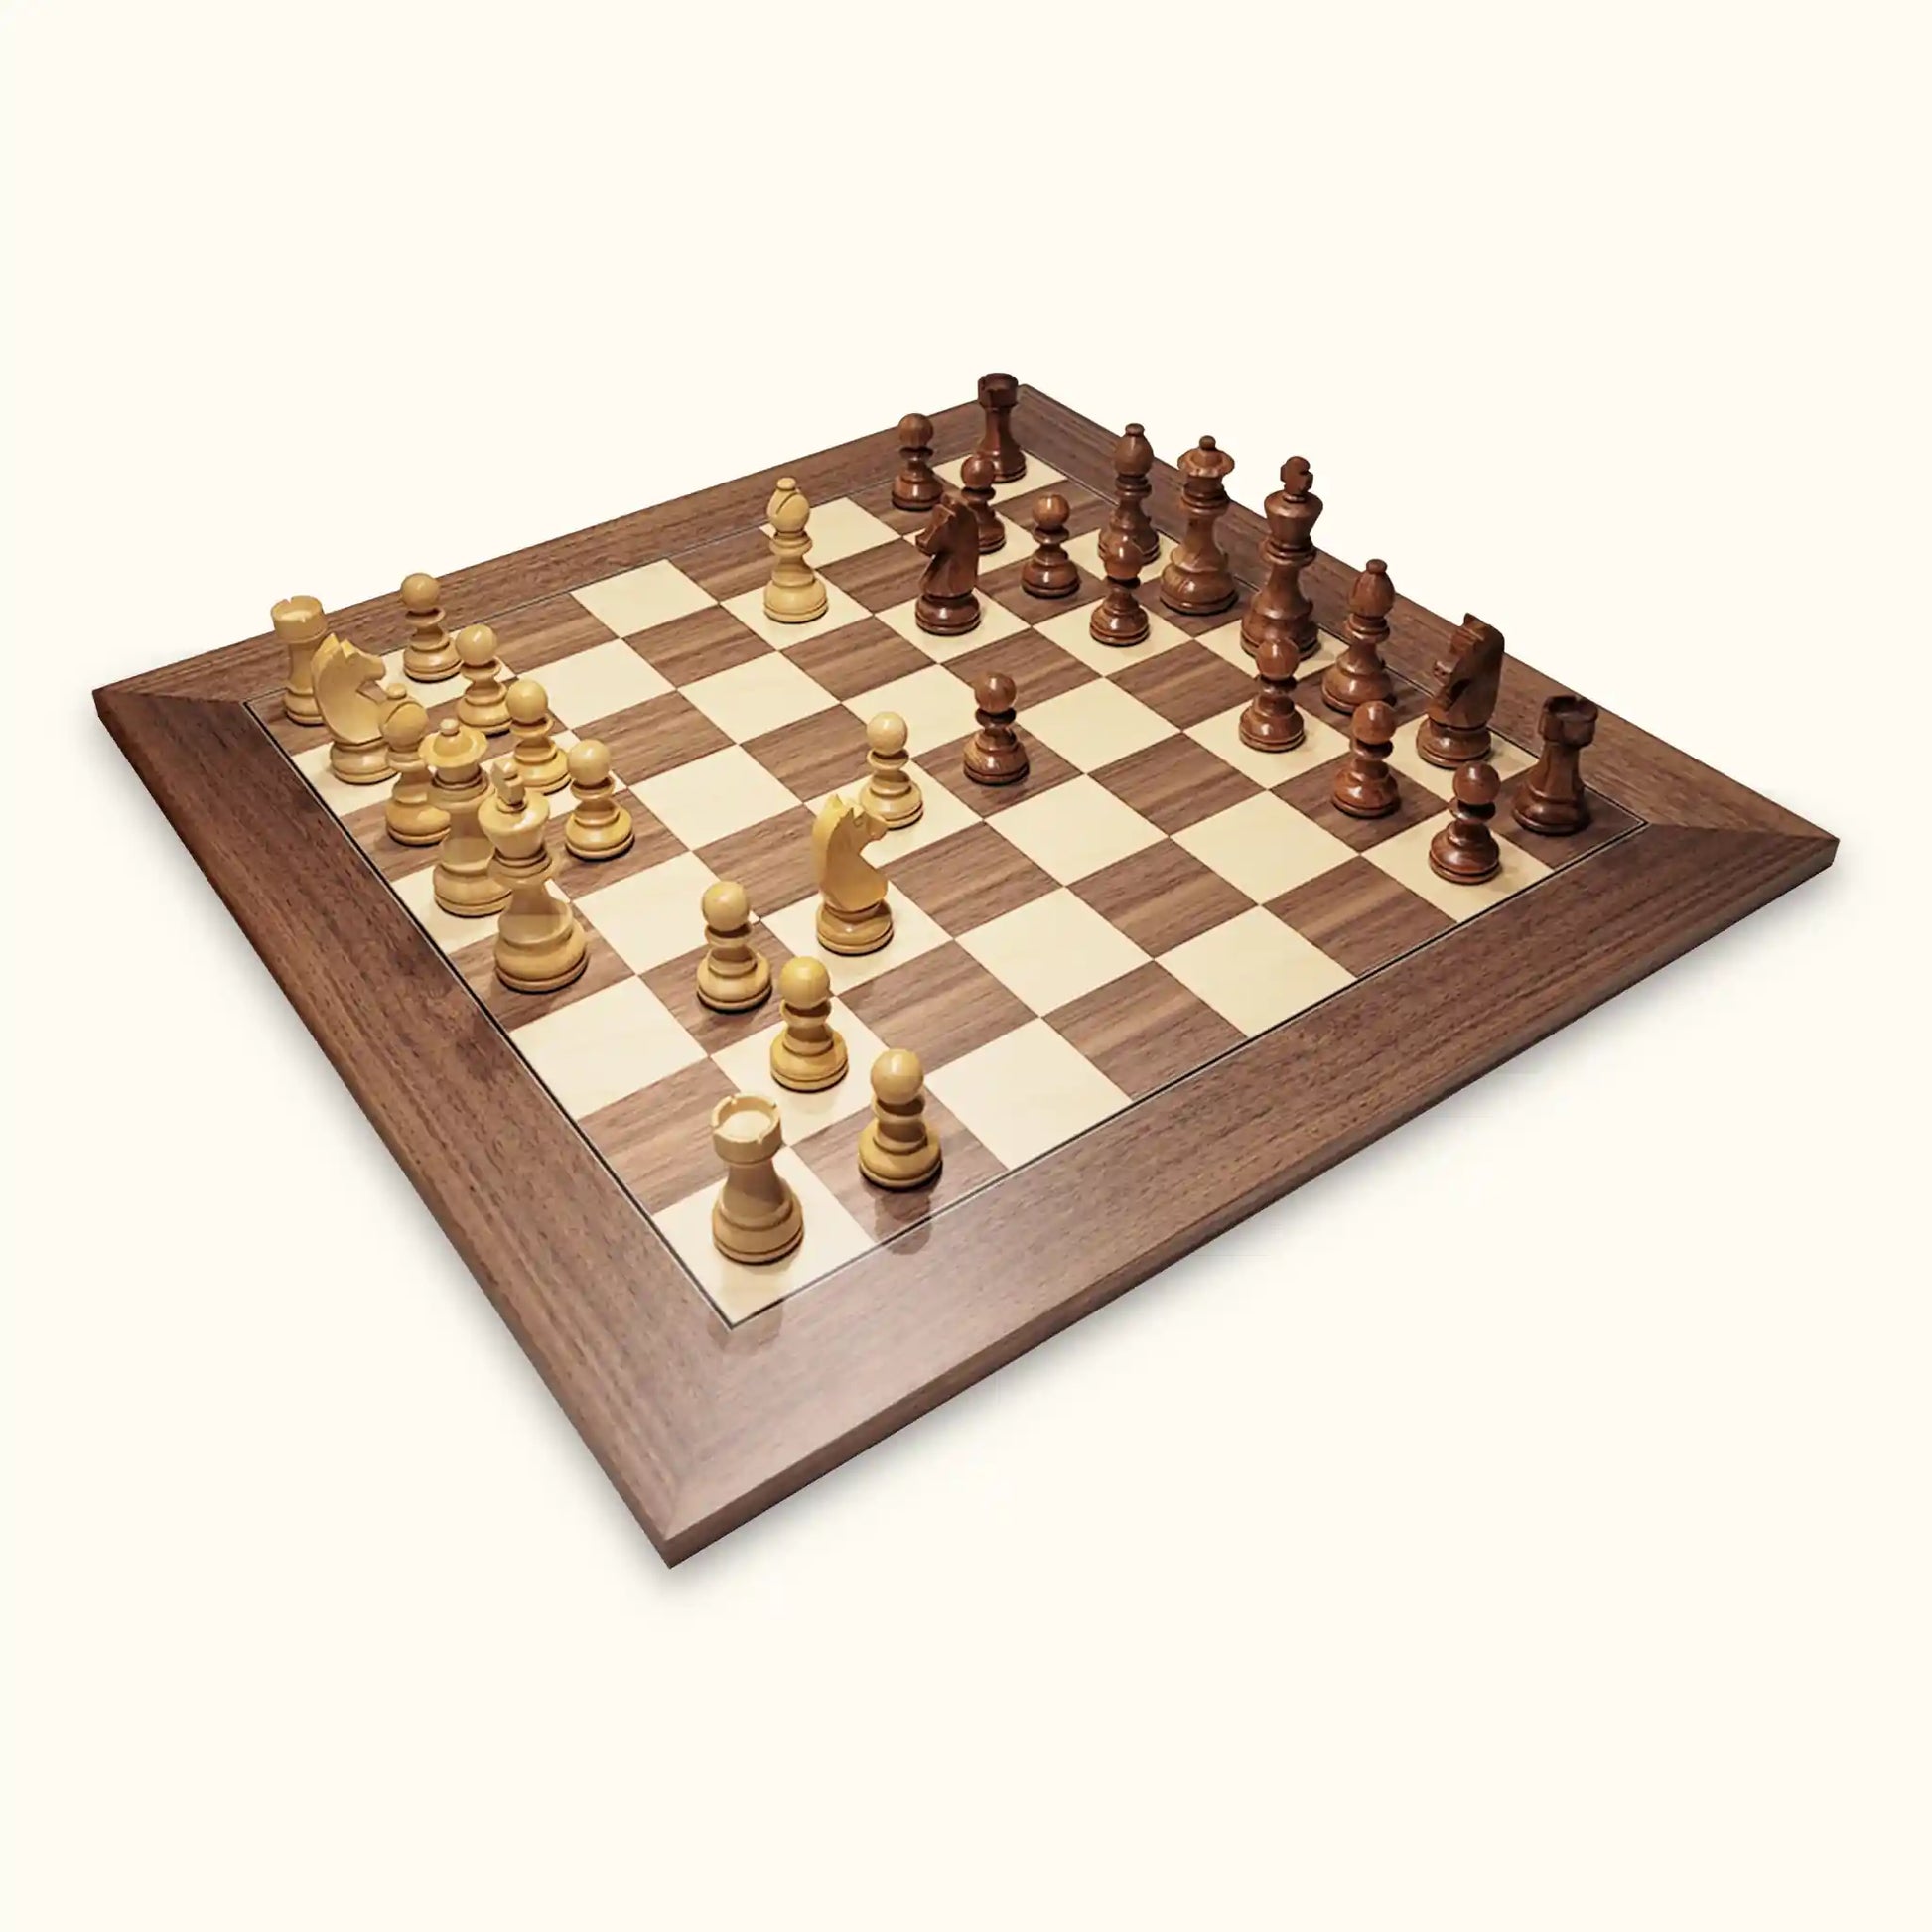 Chessboard walnut deluxe with chess pieces german knight diagonal